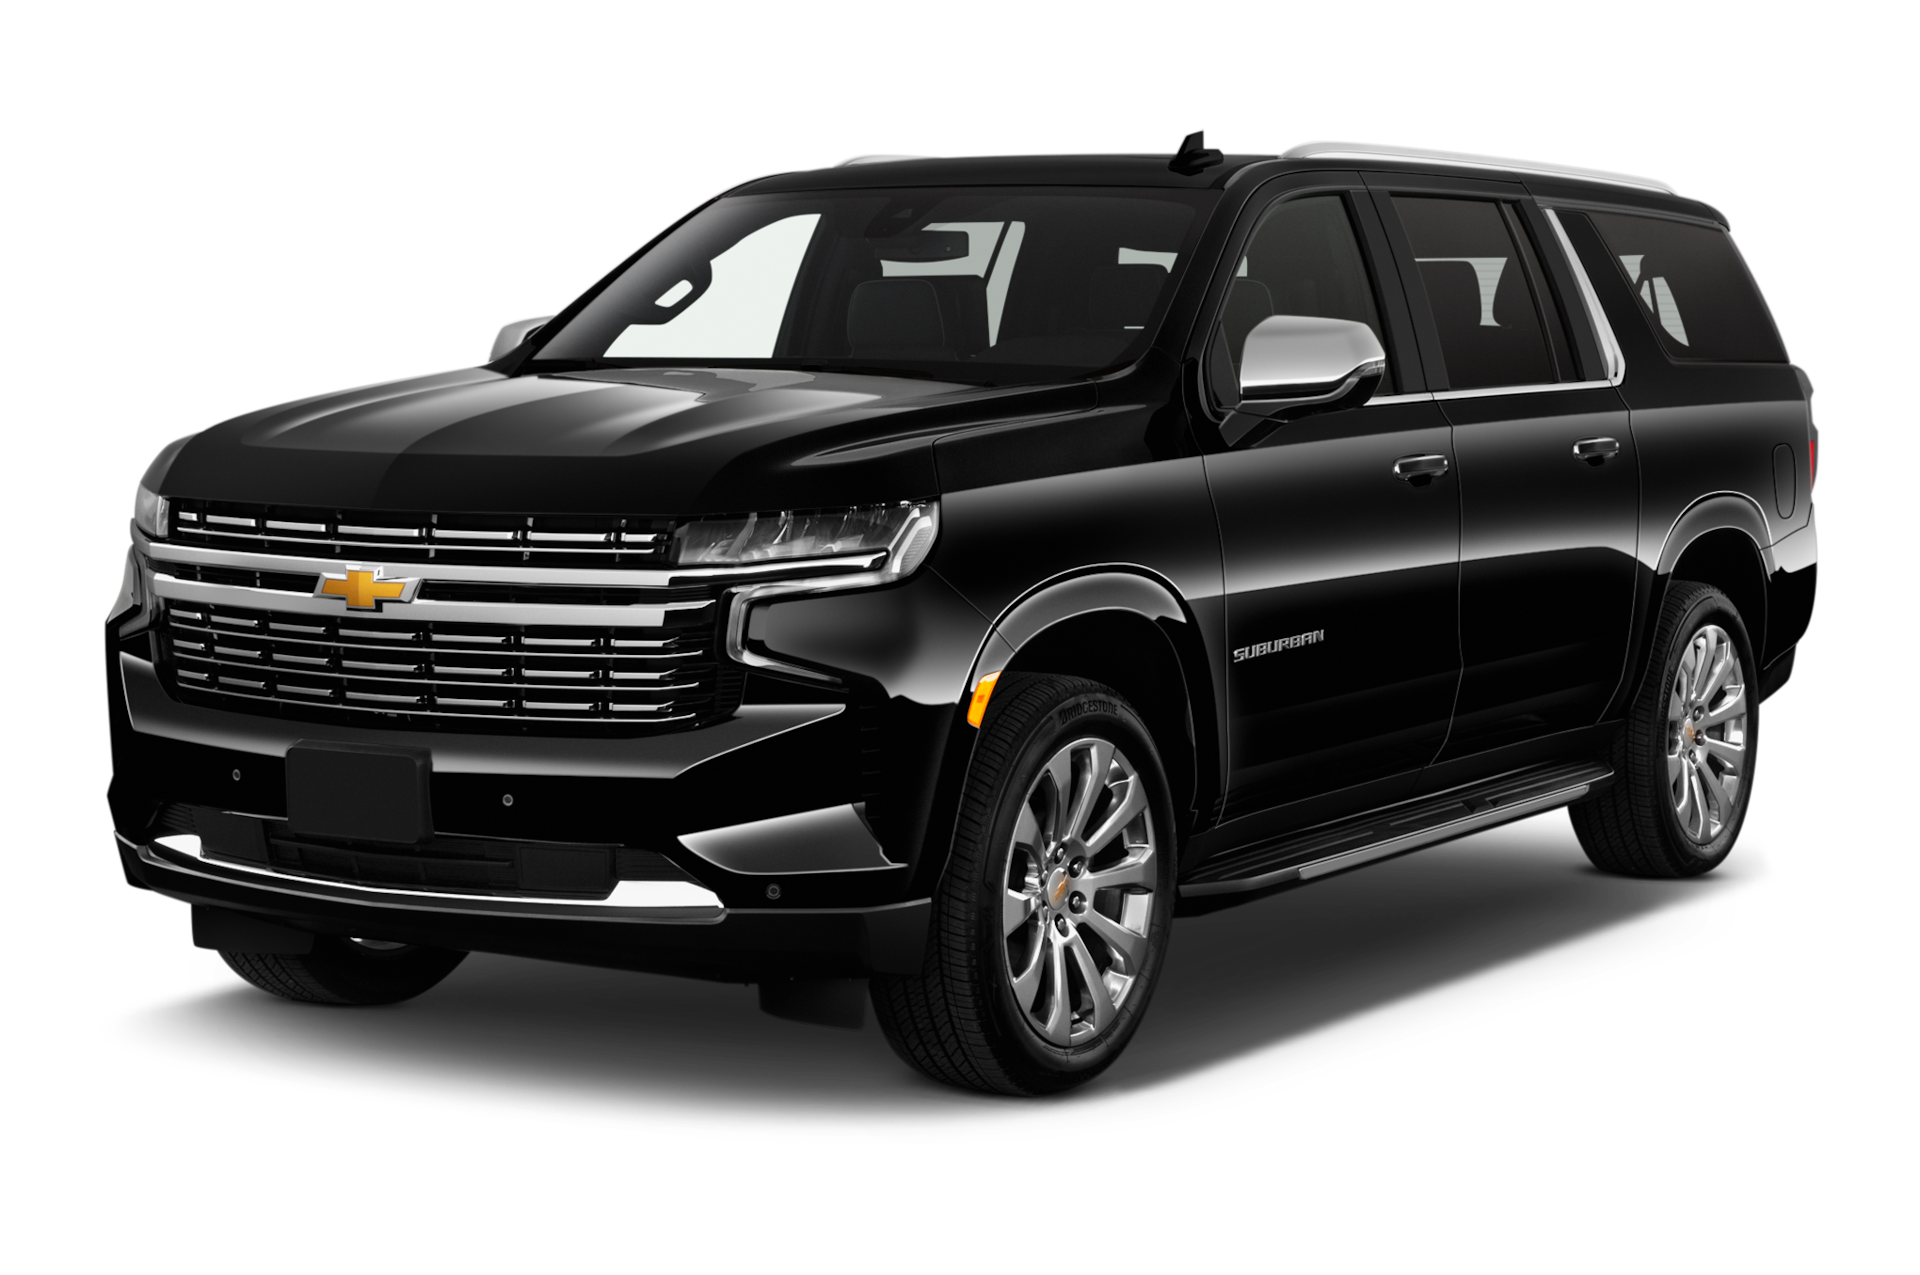 2022 Chevrolet Suburban Prices, Reviews, and Photos - MotorTrend